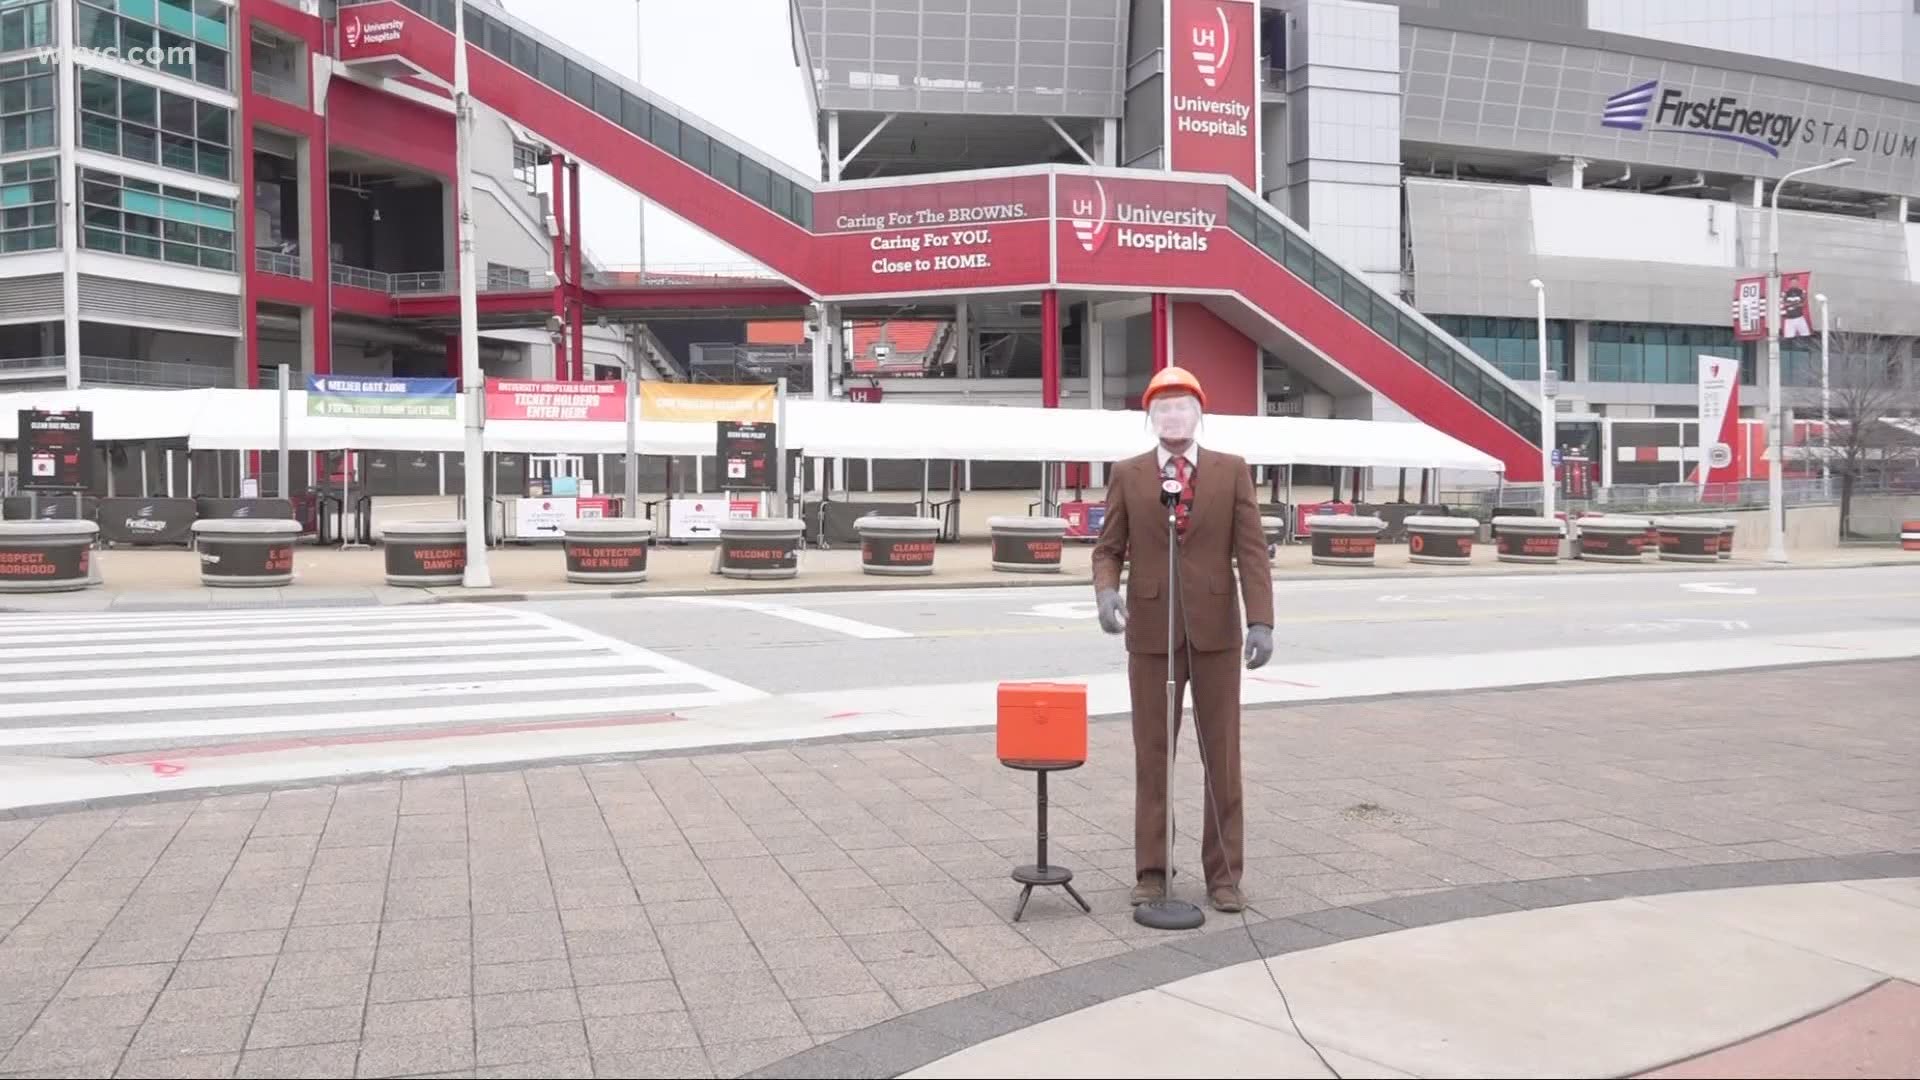 It's been 10 years since Polk Jr. made the viral Youtube video calling FirstEnergy Stadium a "factory of sadness." Today, he puts that title to rest.